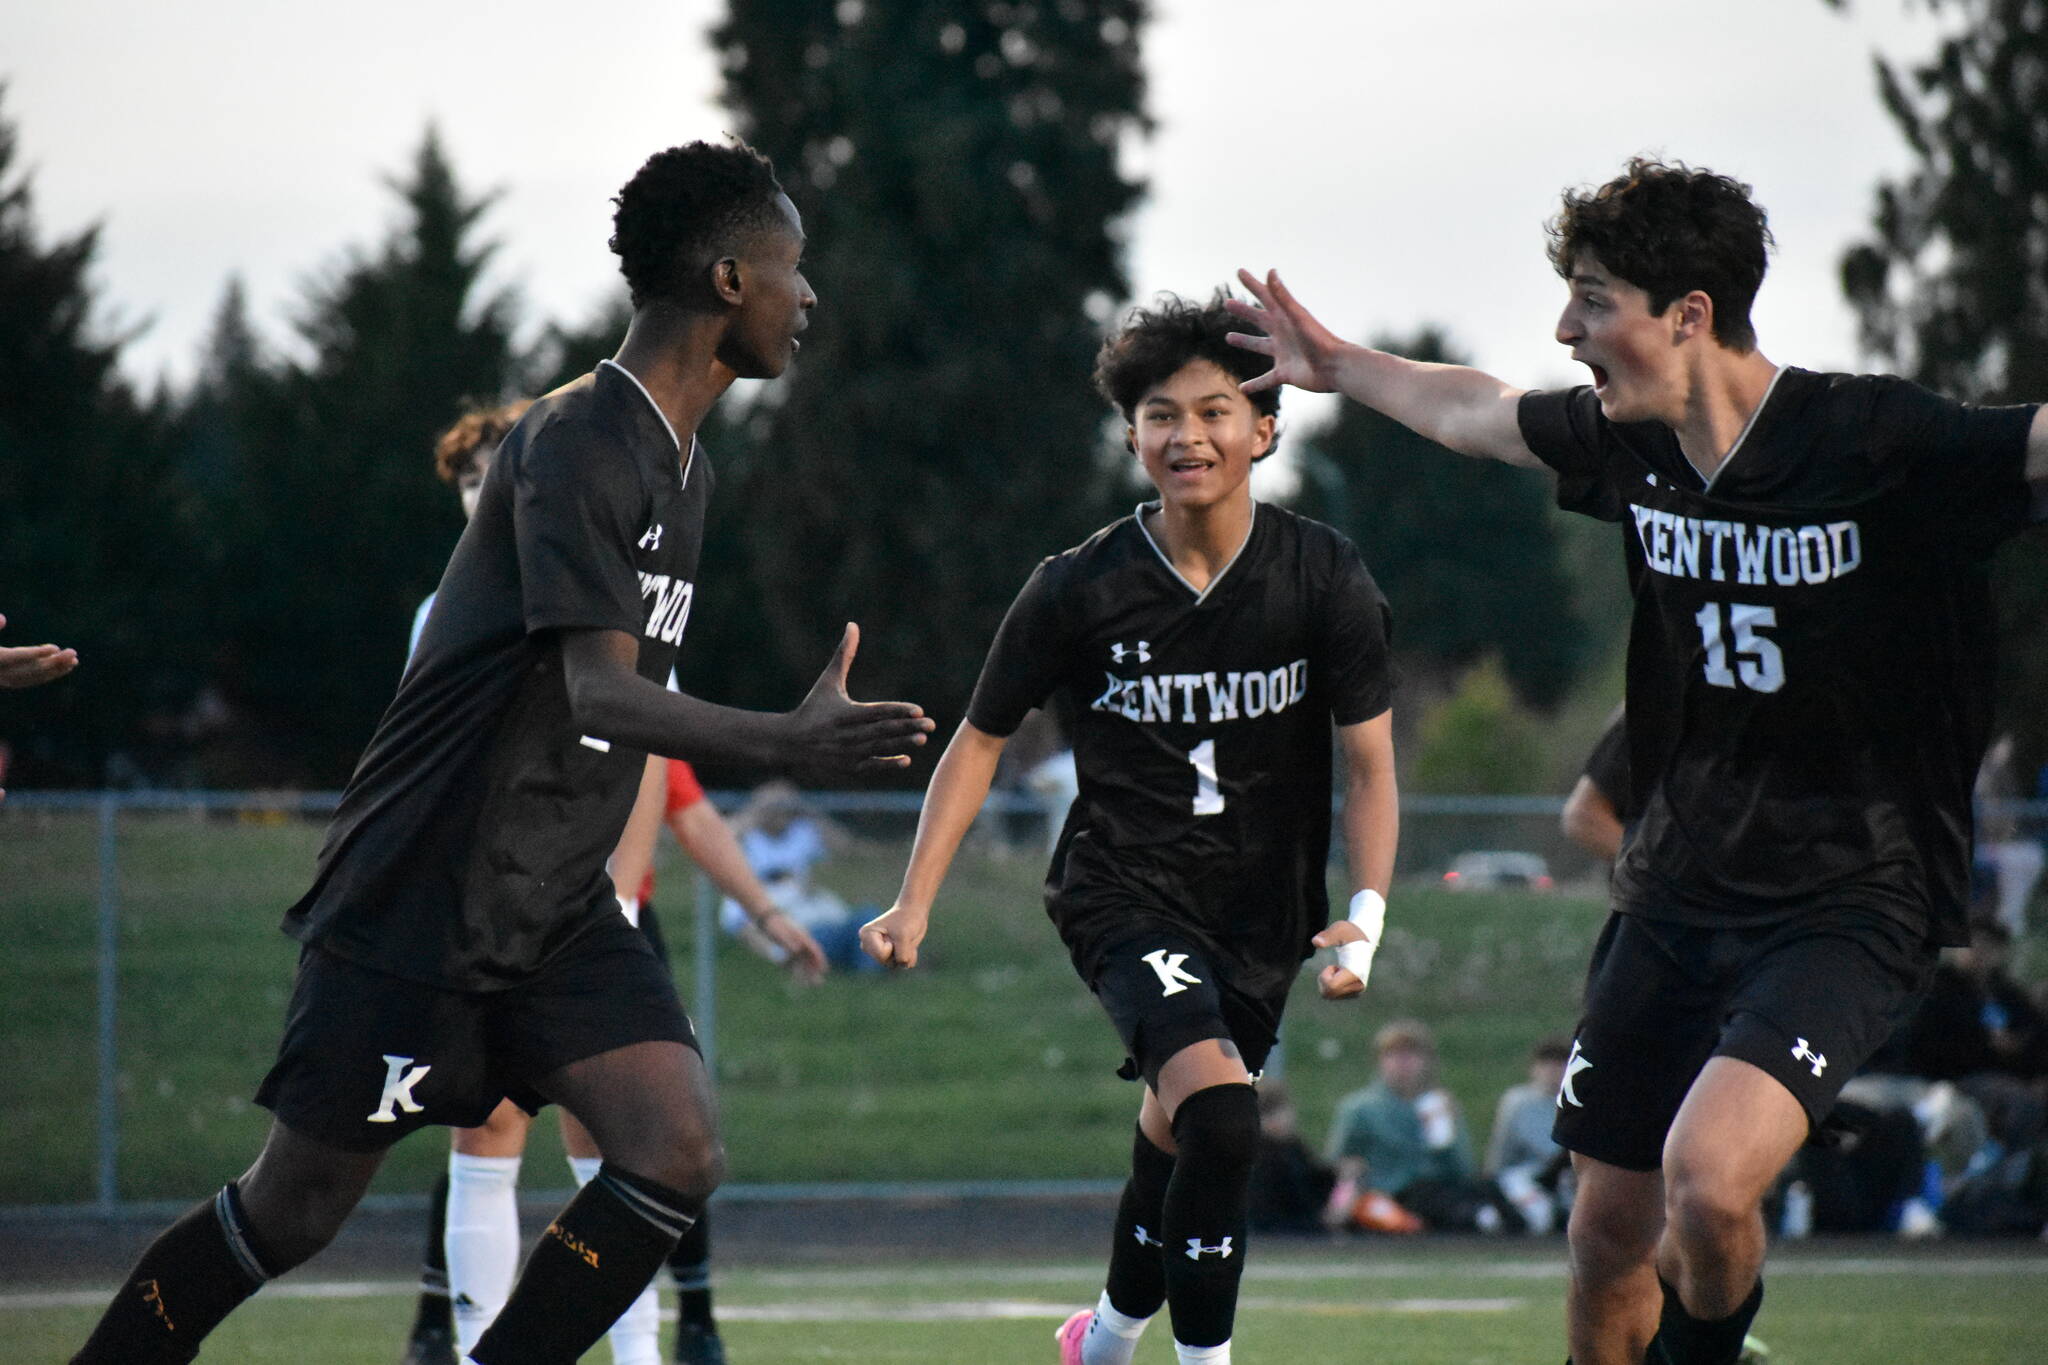 Manny Nzongani (left), Ethan Nonthaveth (middle) and Gabe Woodward (right) celebrate the first goal of the game. Ben Ray / The Reporter